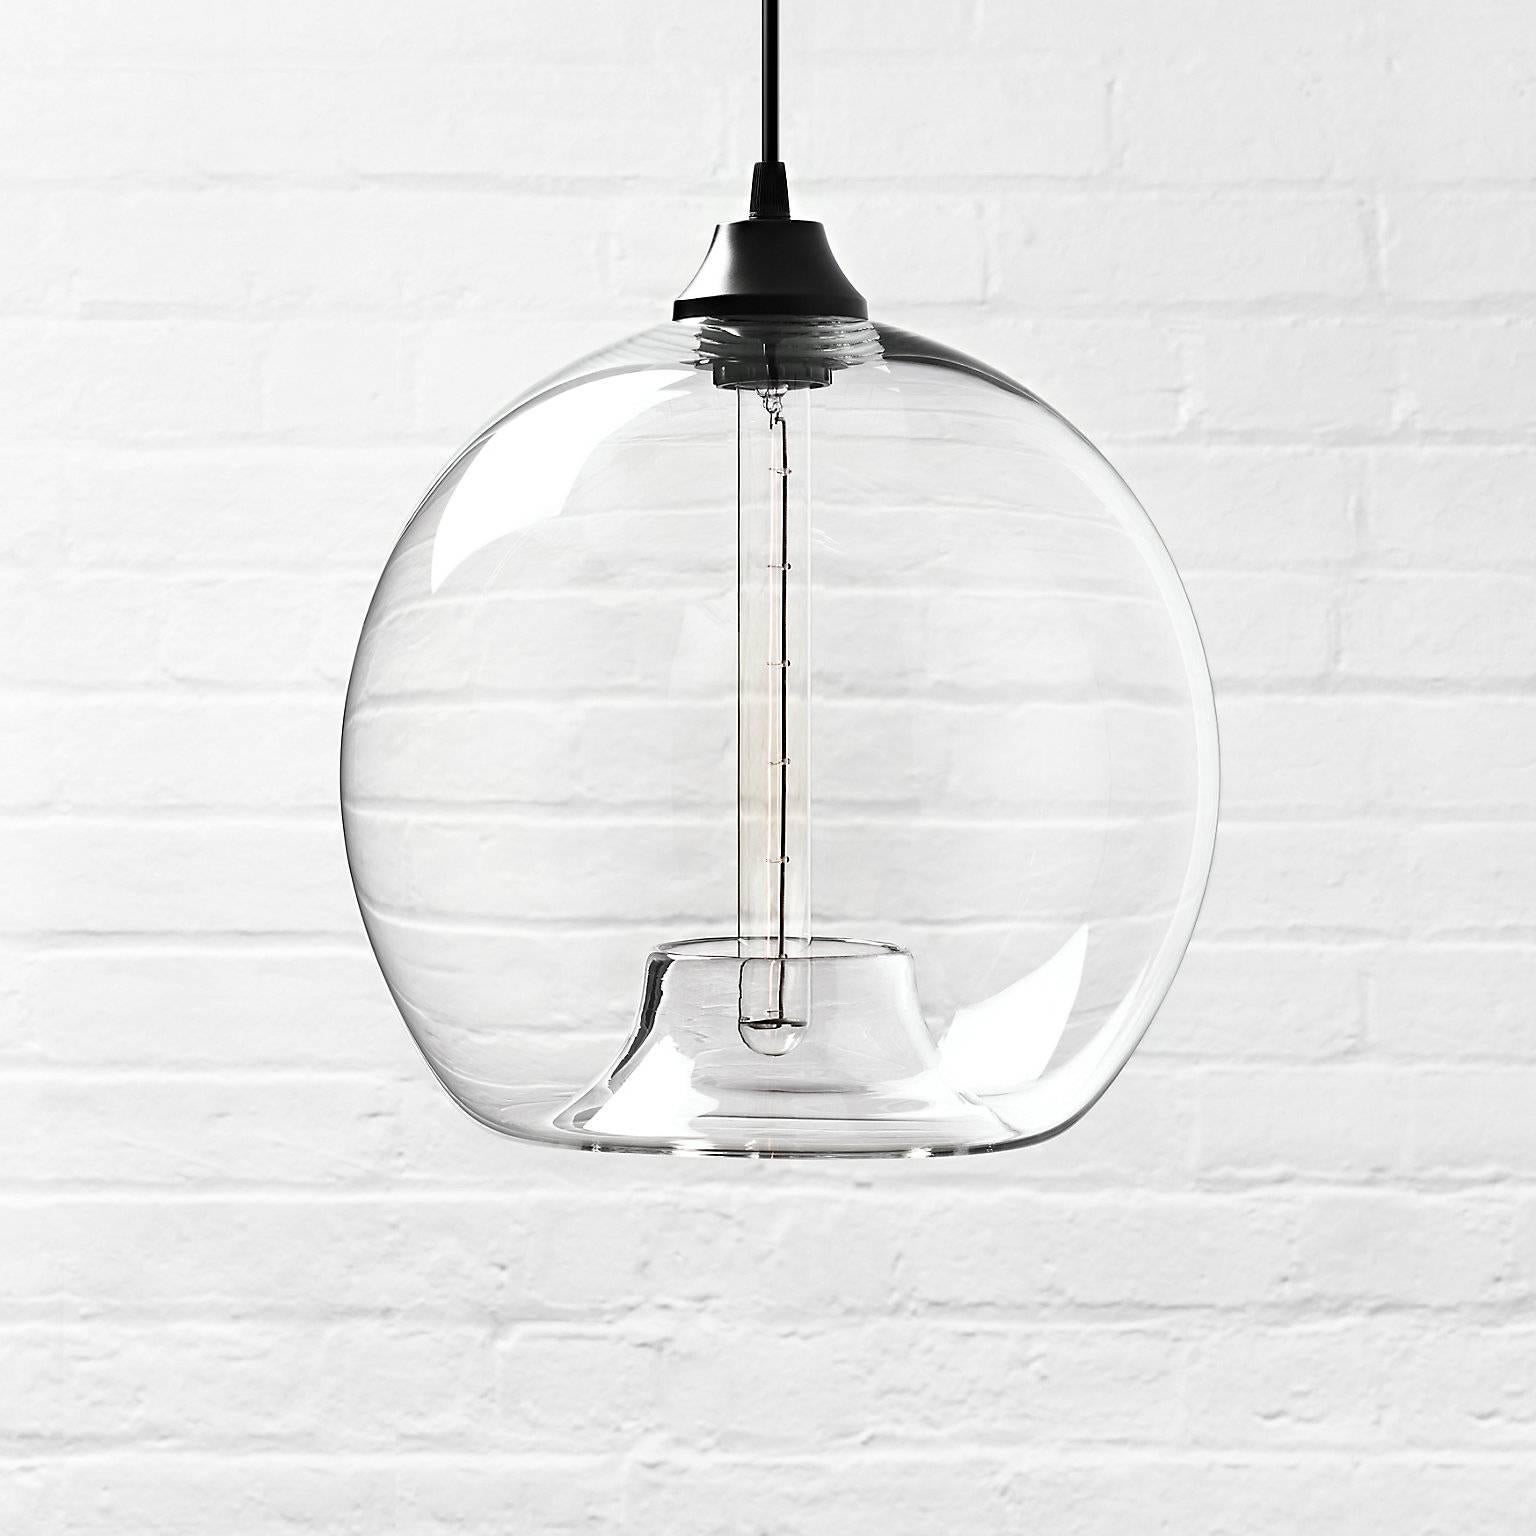 Stamen Smoke Handblown Modern Glass Pendant Light, Made in the USA In New Condition For Sale In Beacon, NY